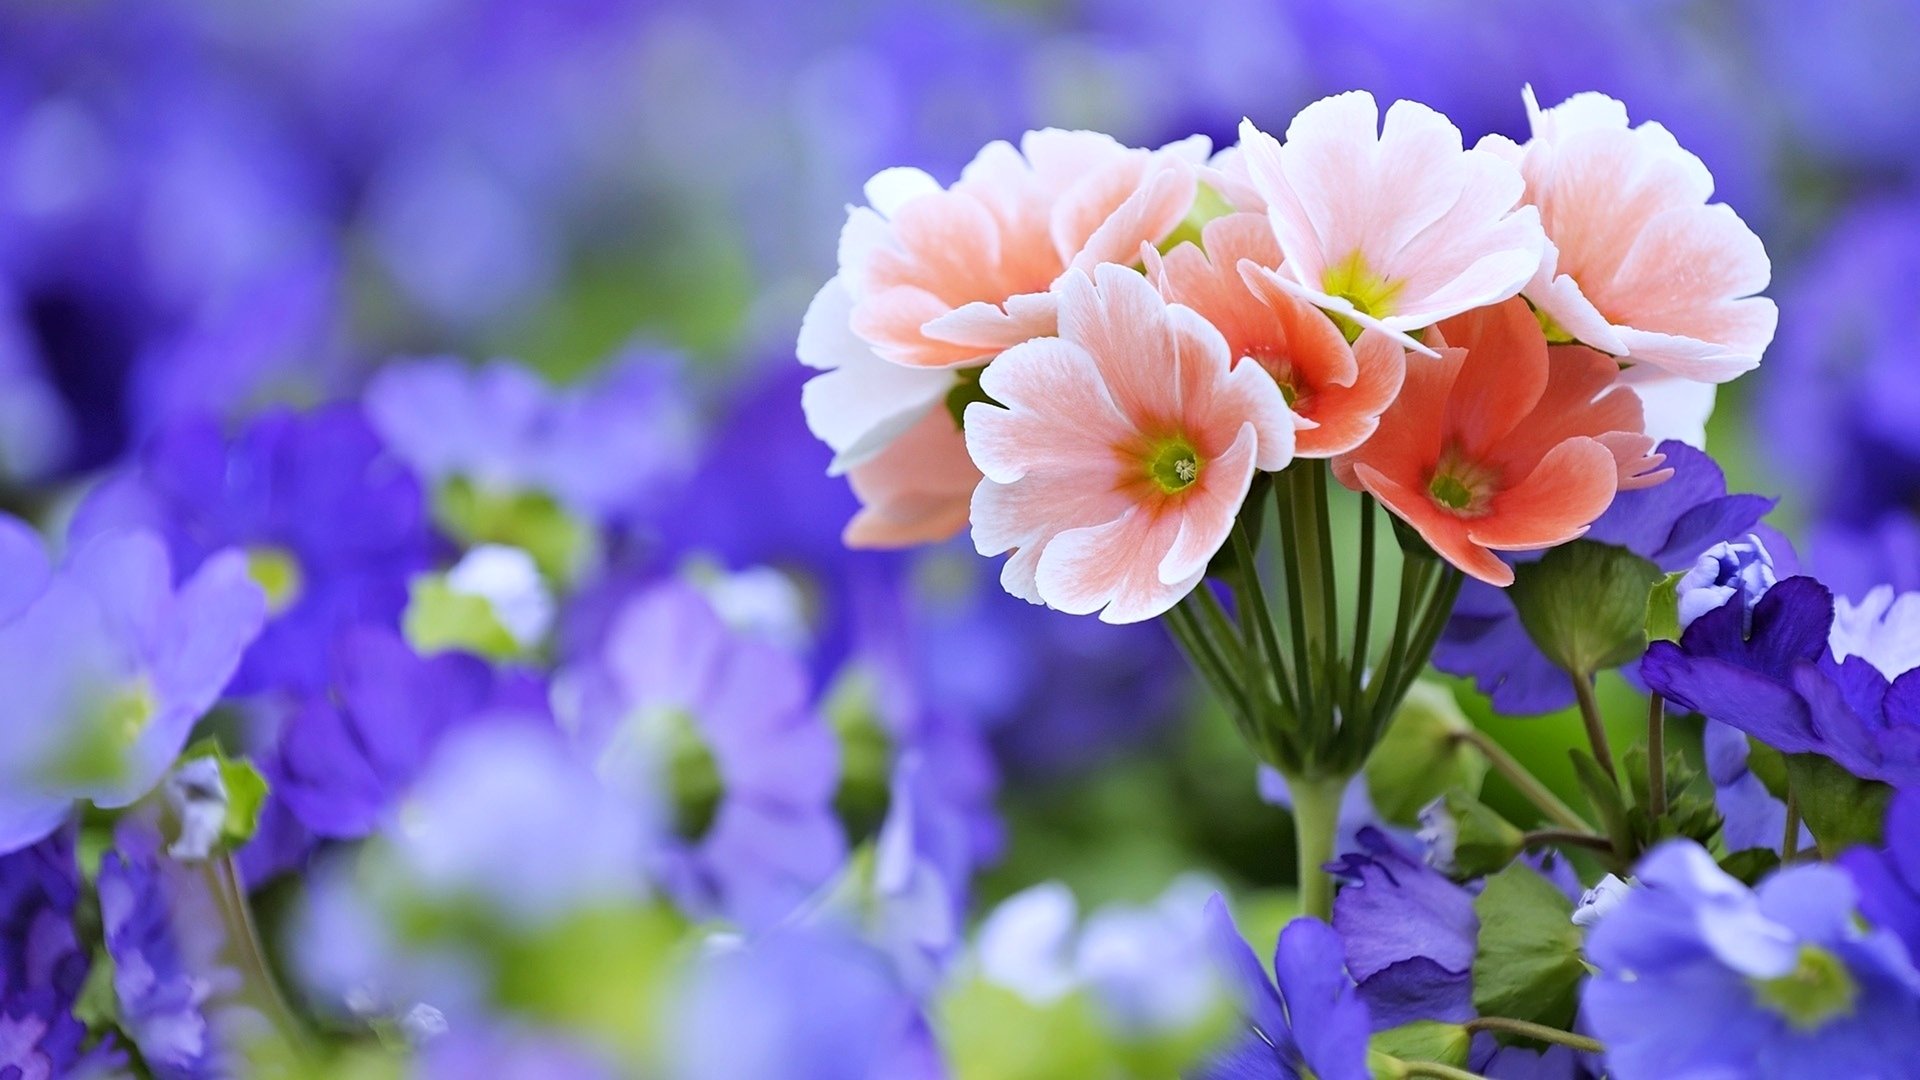 790+ 4K Flower Wallpapers | Background Images